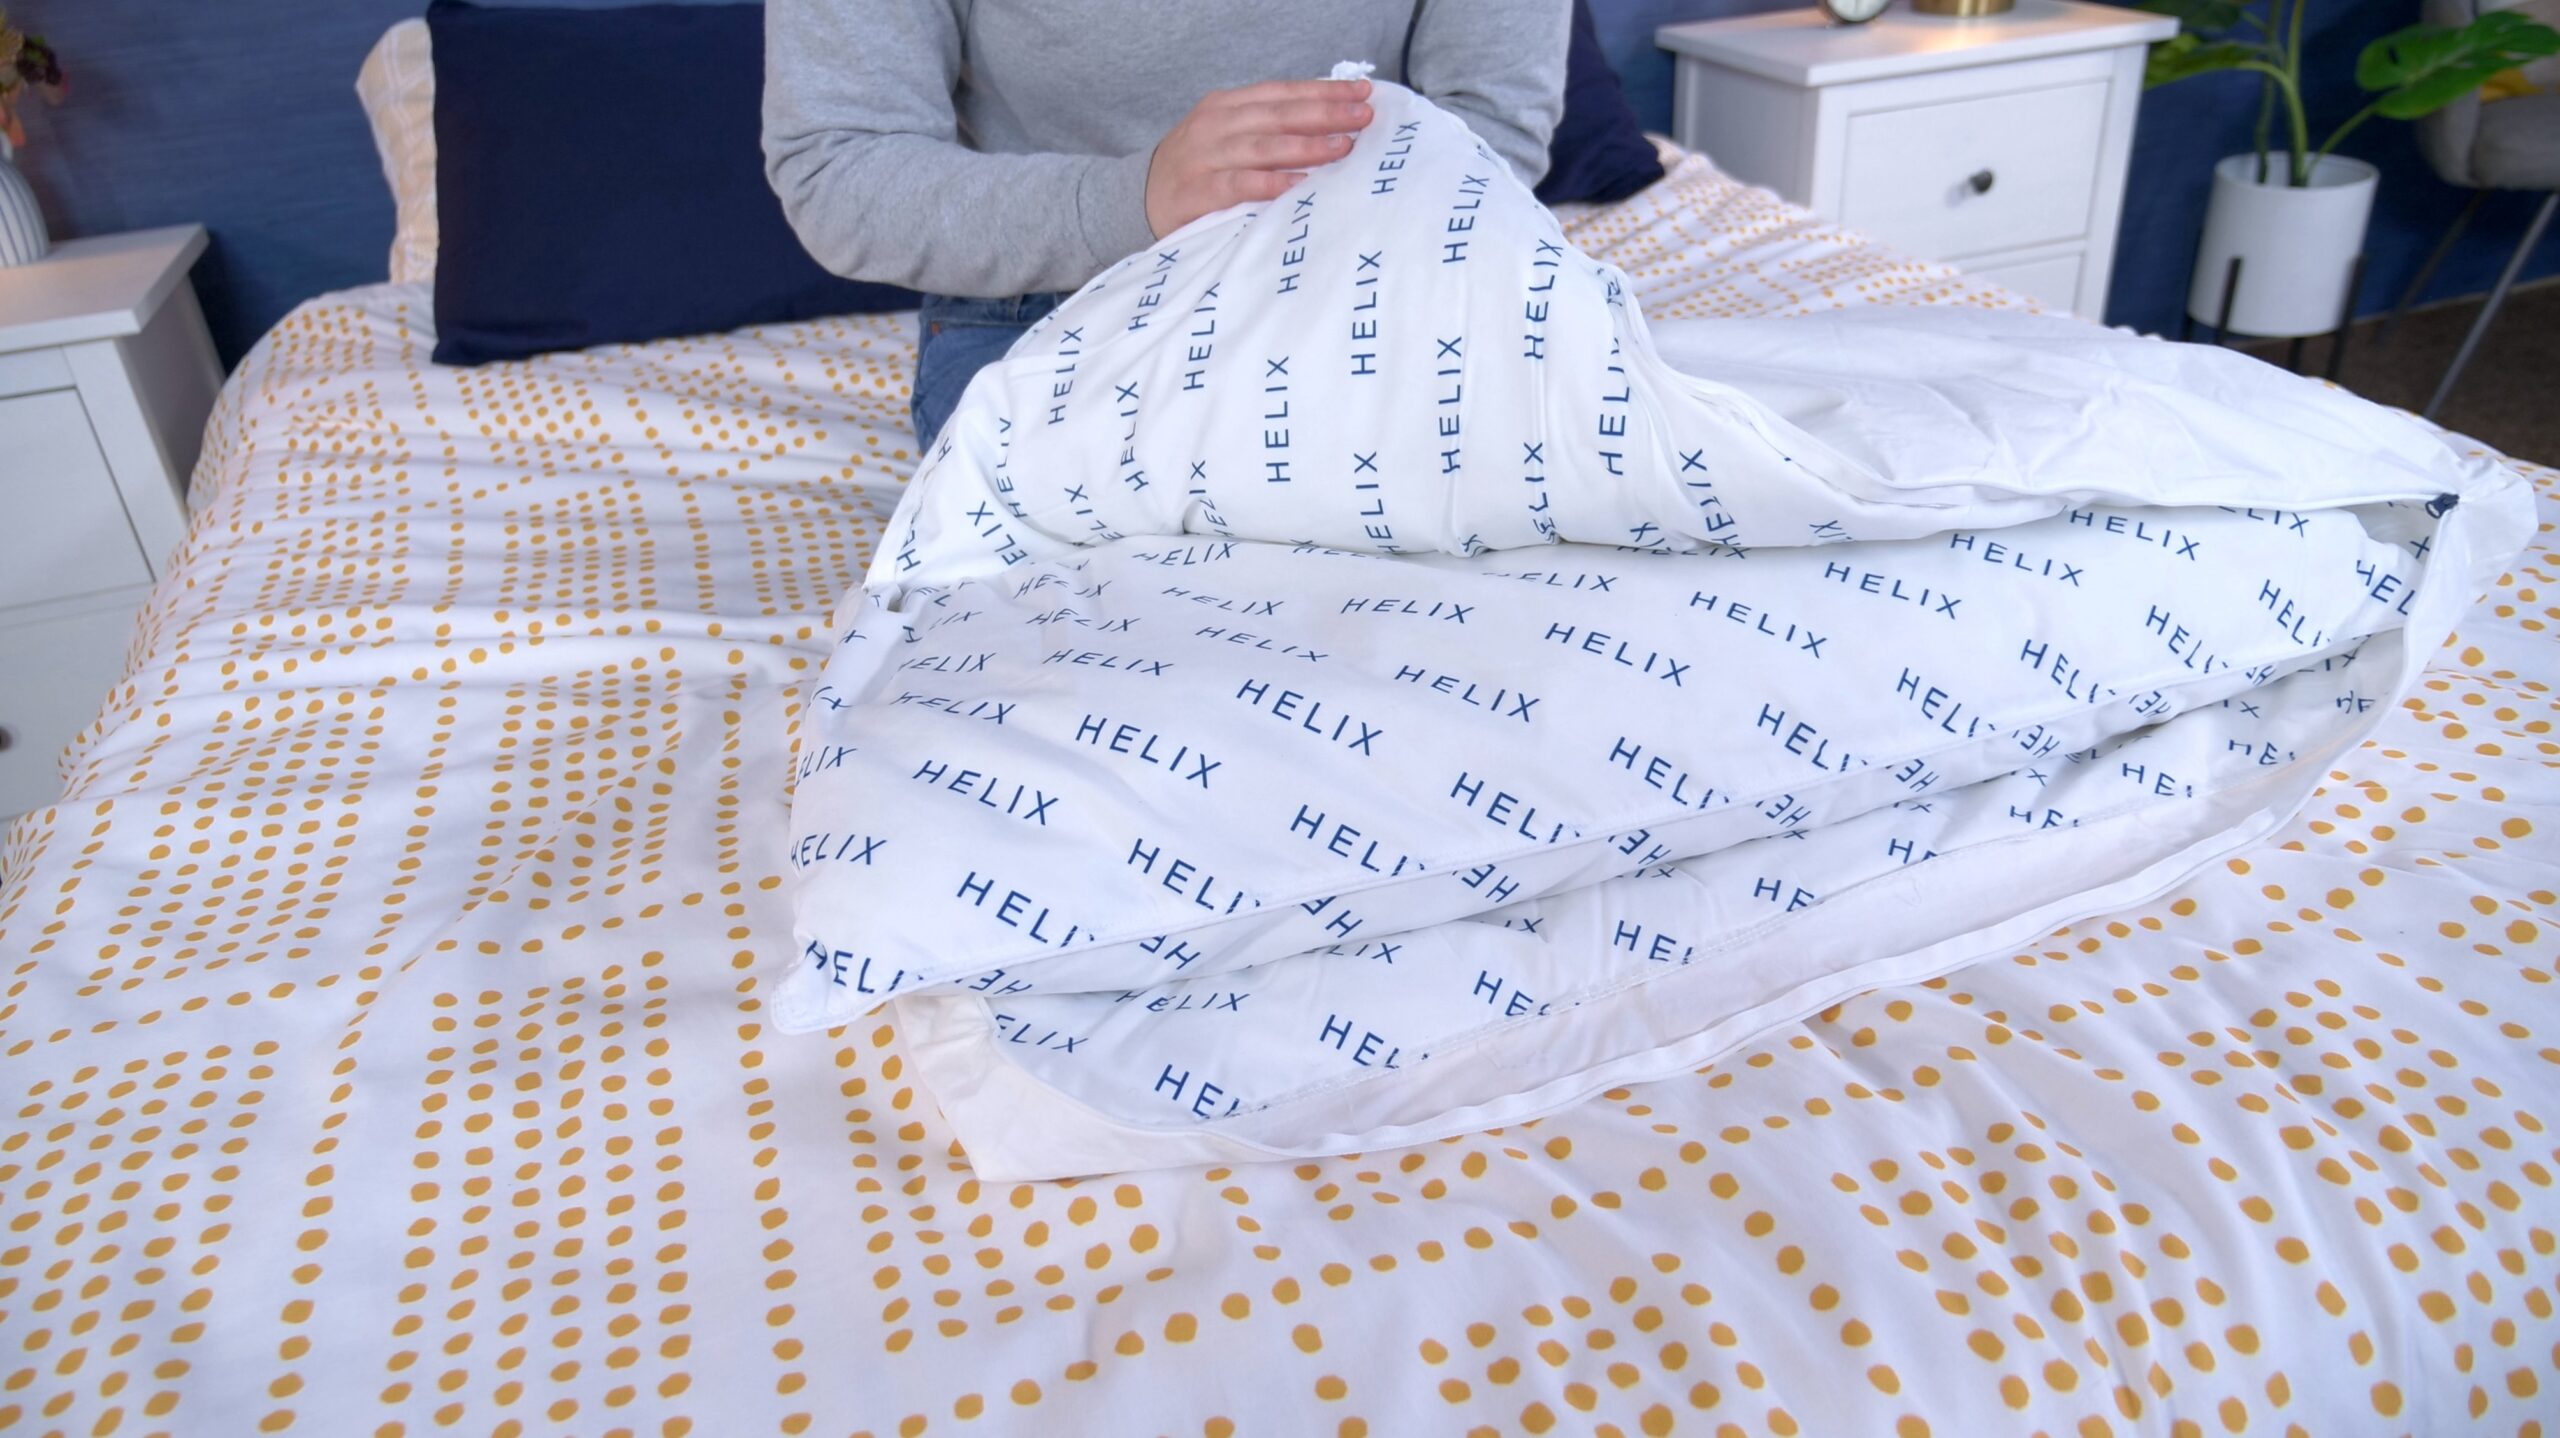 Shop Wedge Pillows by Helix  Reduce Back & Neck Pain - Helix Sleep